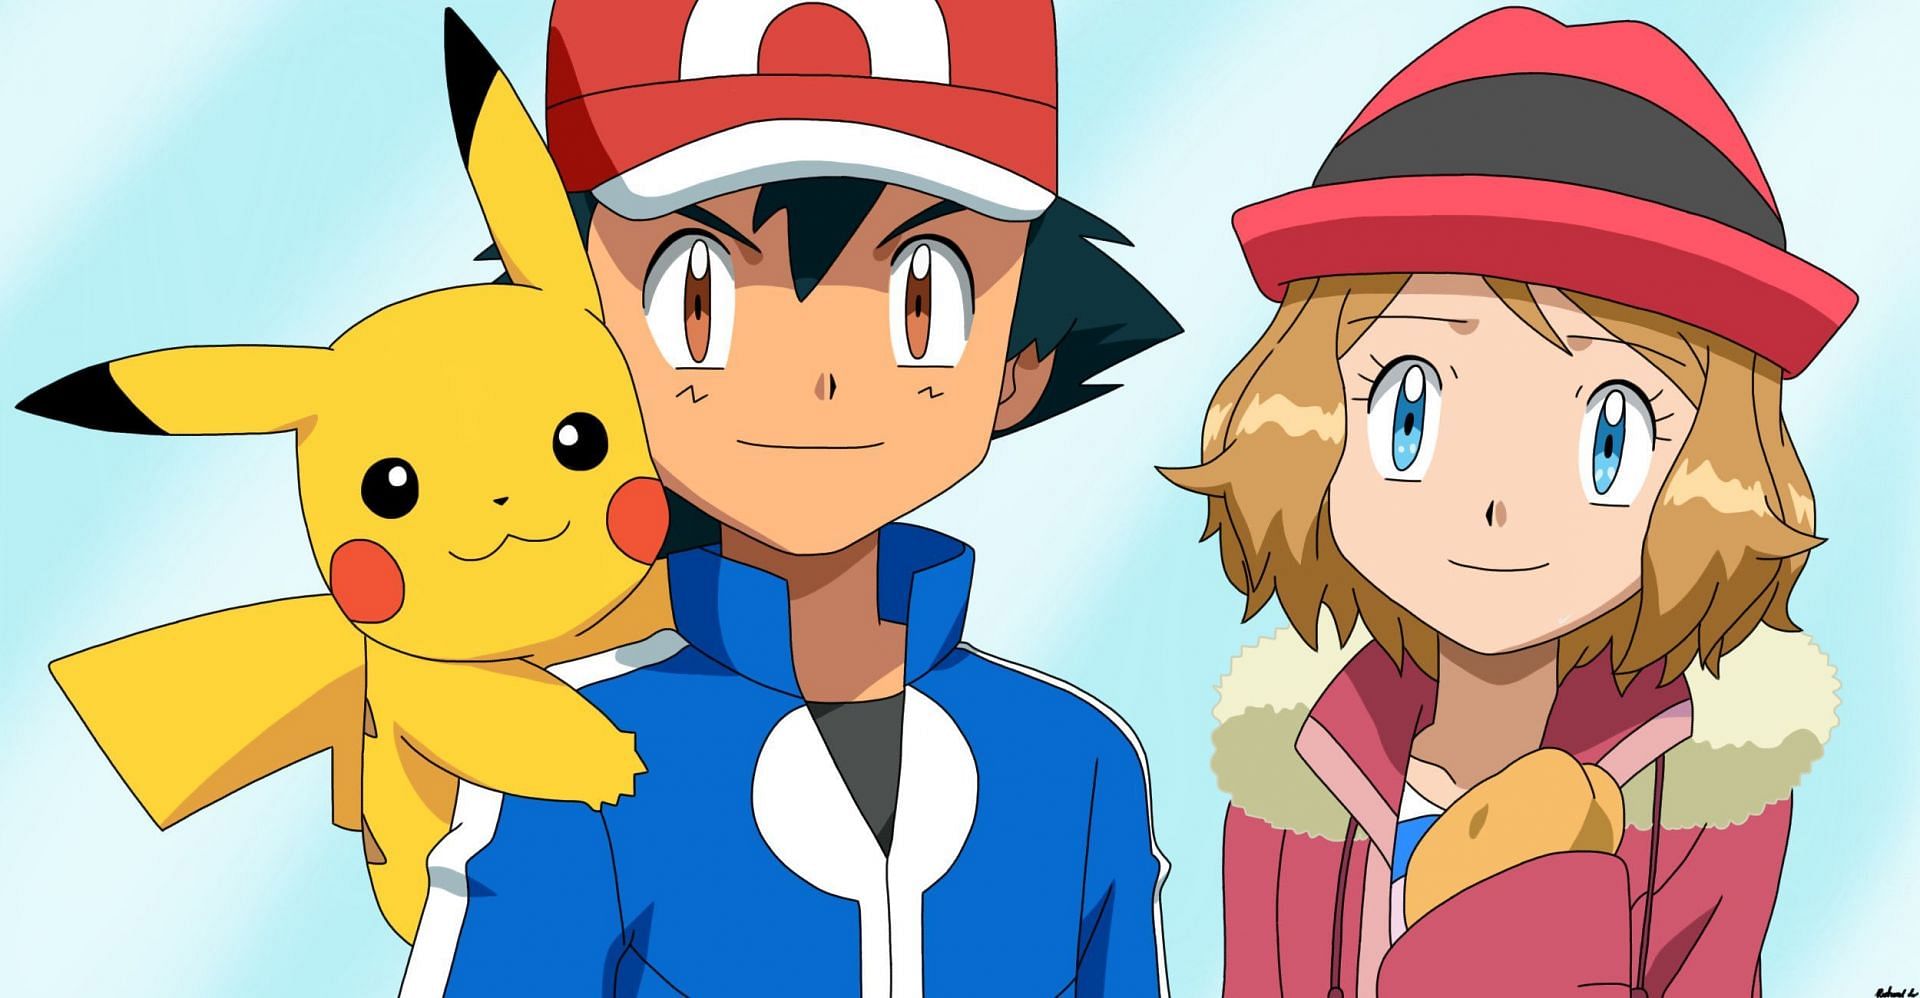 Which Pokemon girl does Ash really feel love for, Misty or Sarina